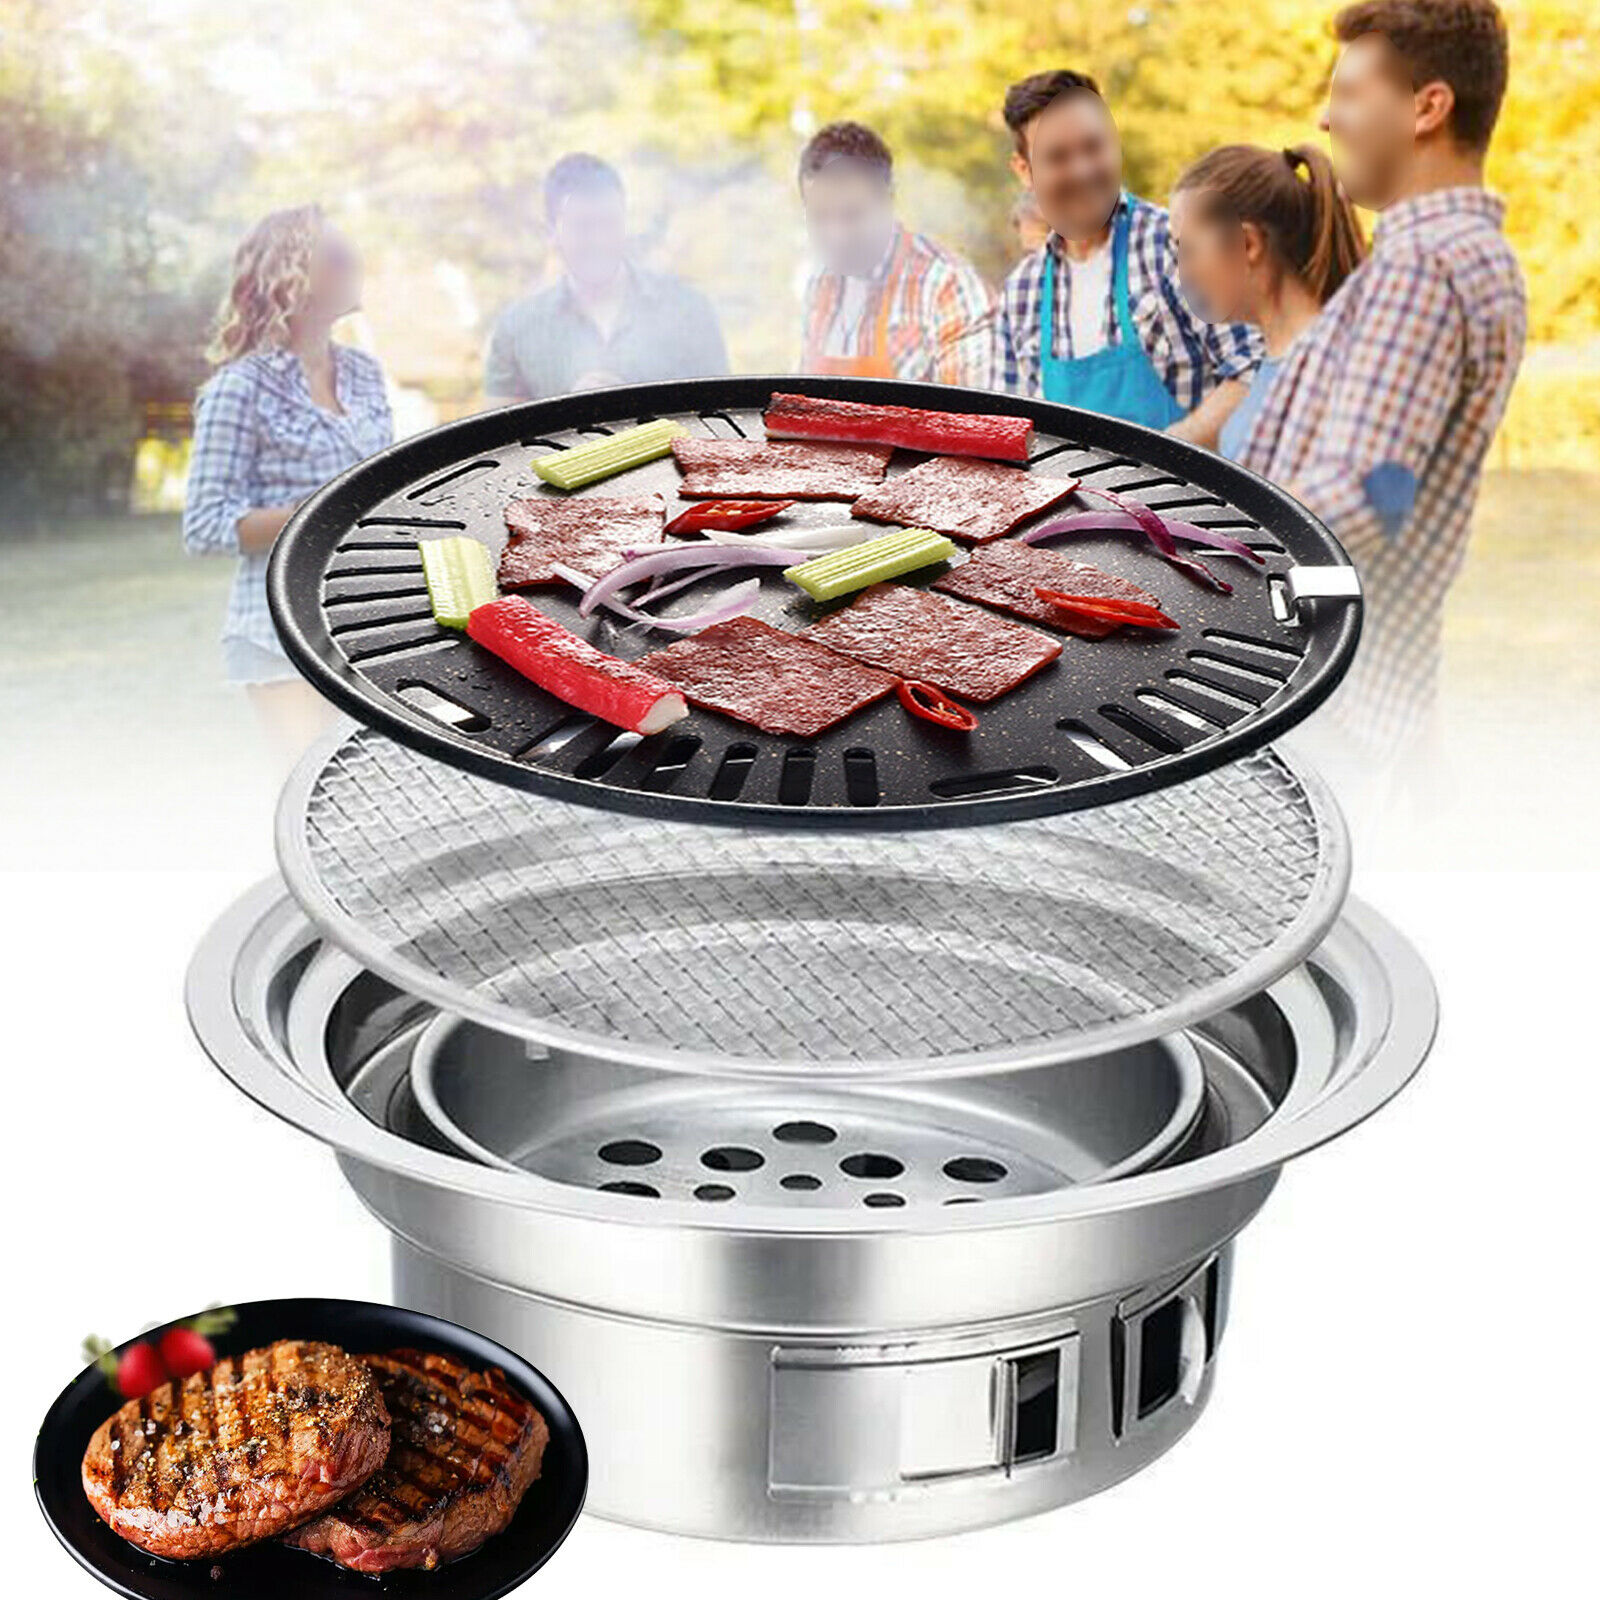 Portable Table Grill, Korean Style BBQ Grill Stainless Steel BBQ Grill Stove Outdoor Camping Cooker Charcoal Grill BBQ Round Barbecue Grill Indoor&Outdoor Grill BBQ - image 1 of 9